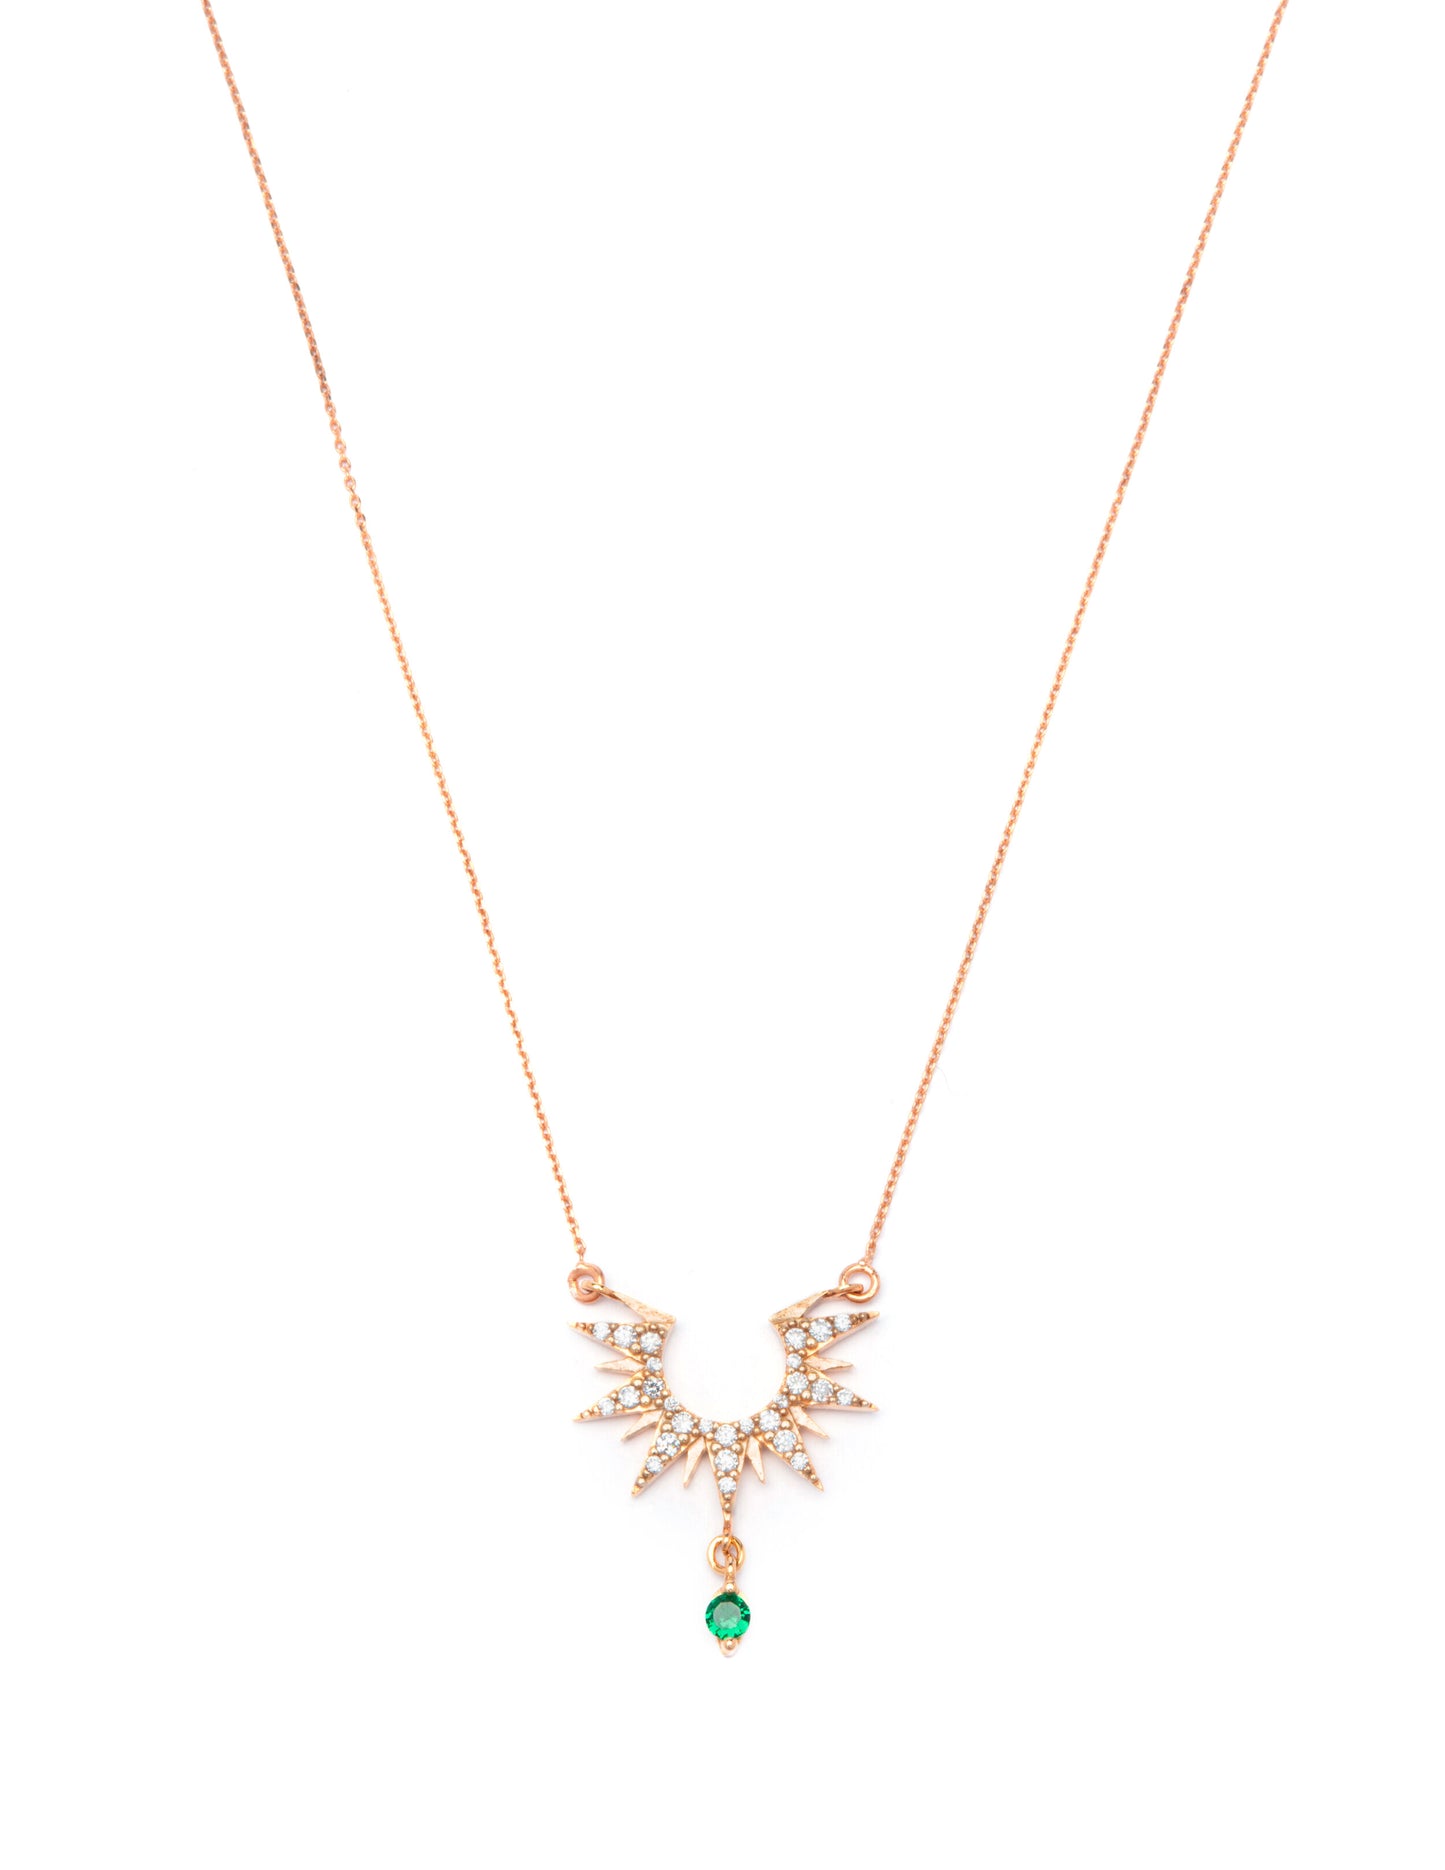 Sun Tie Necklace - Pink Gold plated